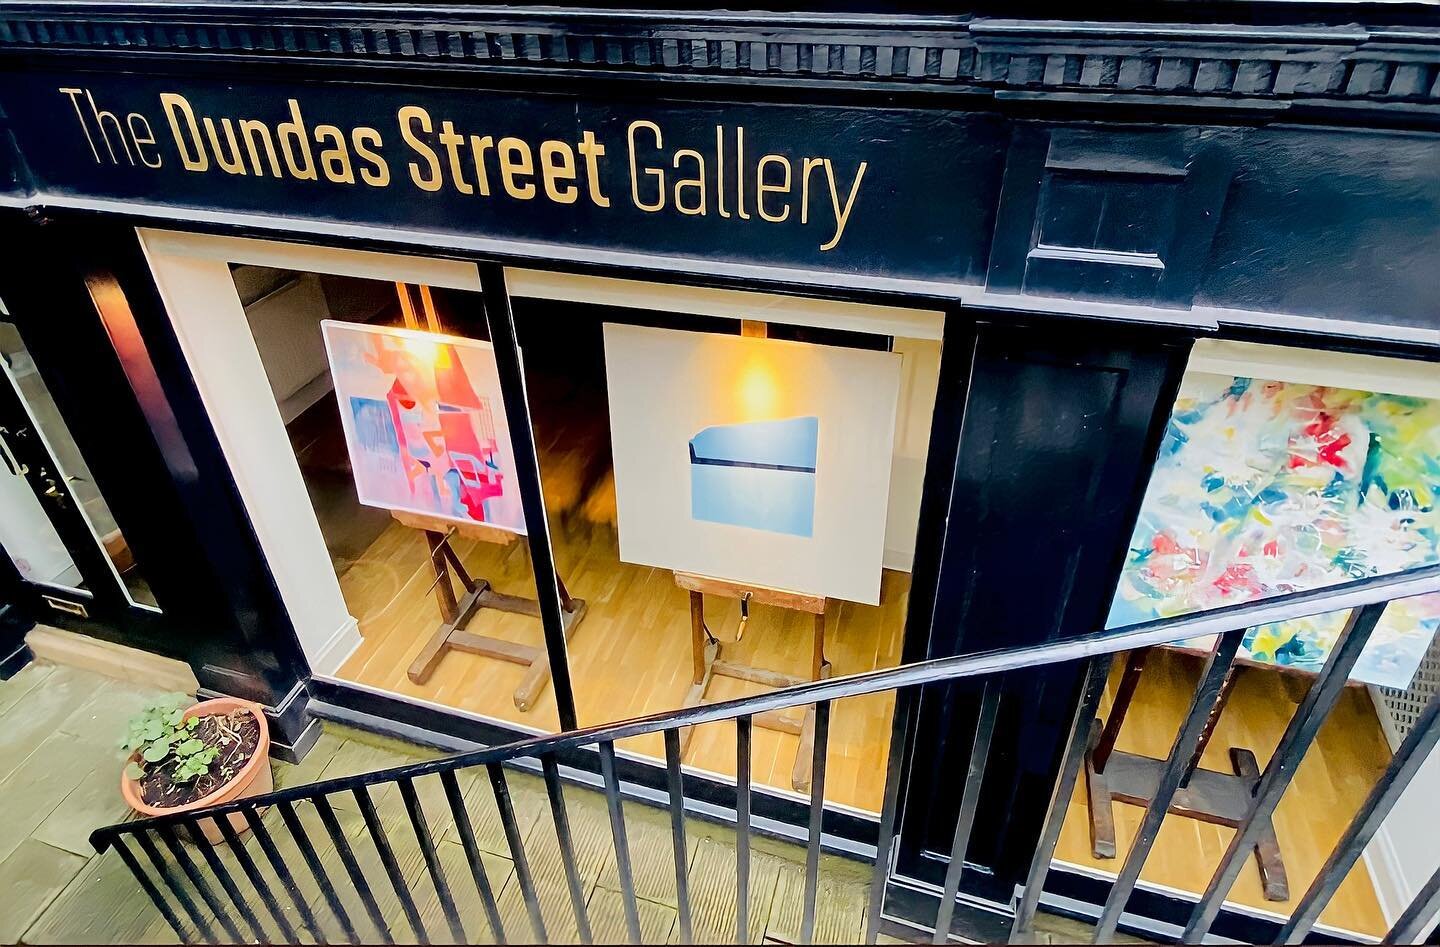 @fettesfineart &amp; The Dundas Street Gallery

&ldquo;From Philip to Philipson: A Collection of Scottish Masters&rdquo; - the next exciting event from Fettes Fine Art in 2022.

The impressive exhibition will feature a timeline of Scottish Masters pa